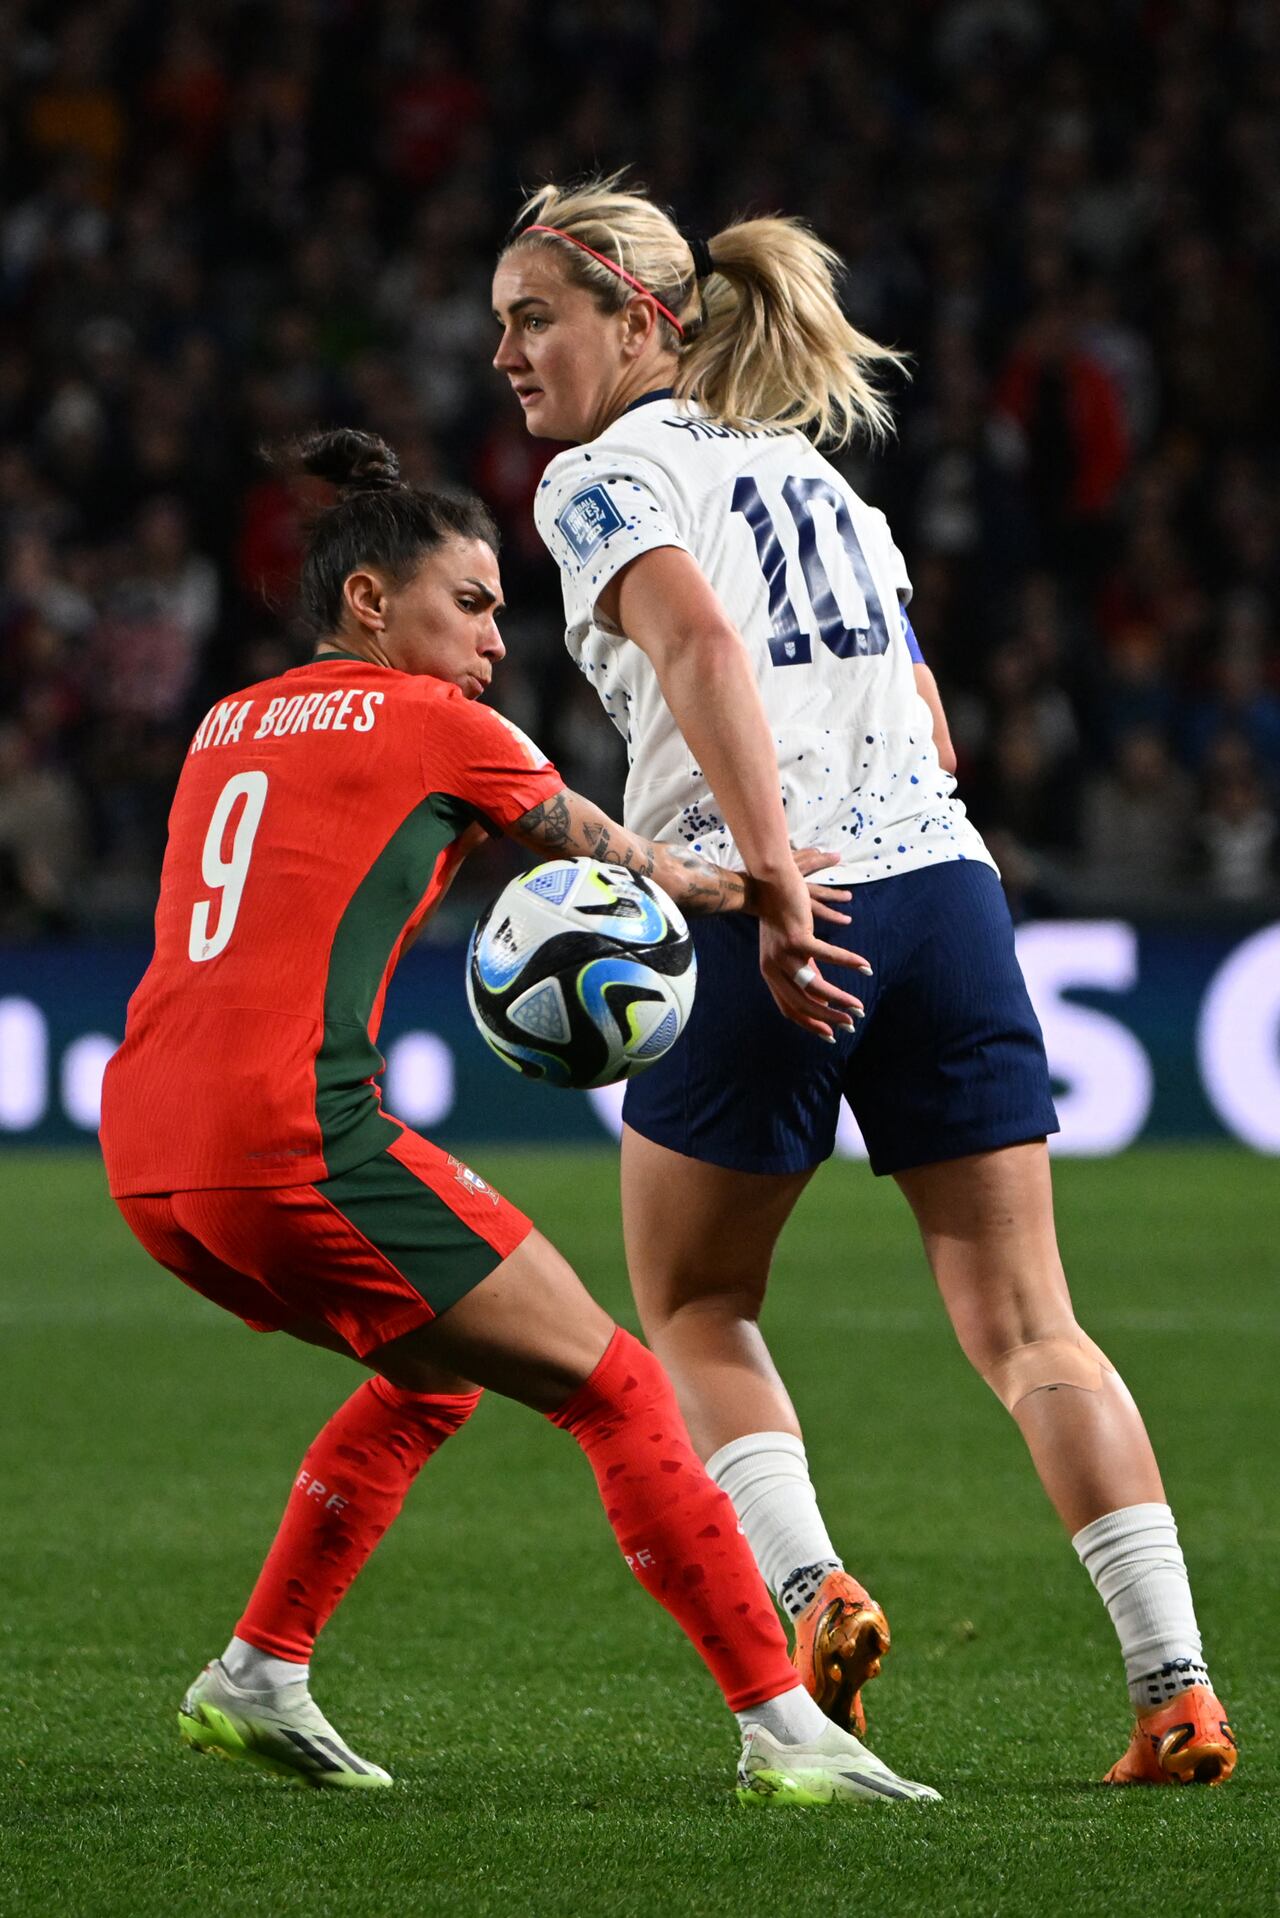 USA's midfielder #10 Lindsey Horan (R) fights for the ball with Portugal's forward #09 Ana Borges (L) during the Australia and New Zealand 2023 Women's World Cup Group E football match between Portugal and the United States at Eden Park in Auckland on August 1, 2023. (Photo by Saeed KHAN / AFP)